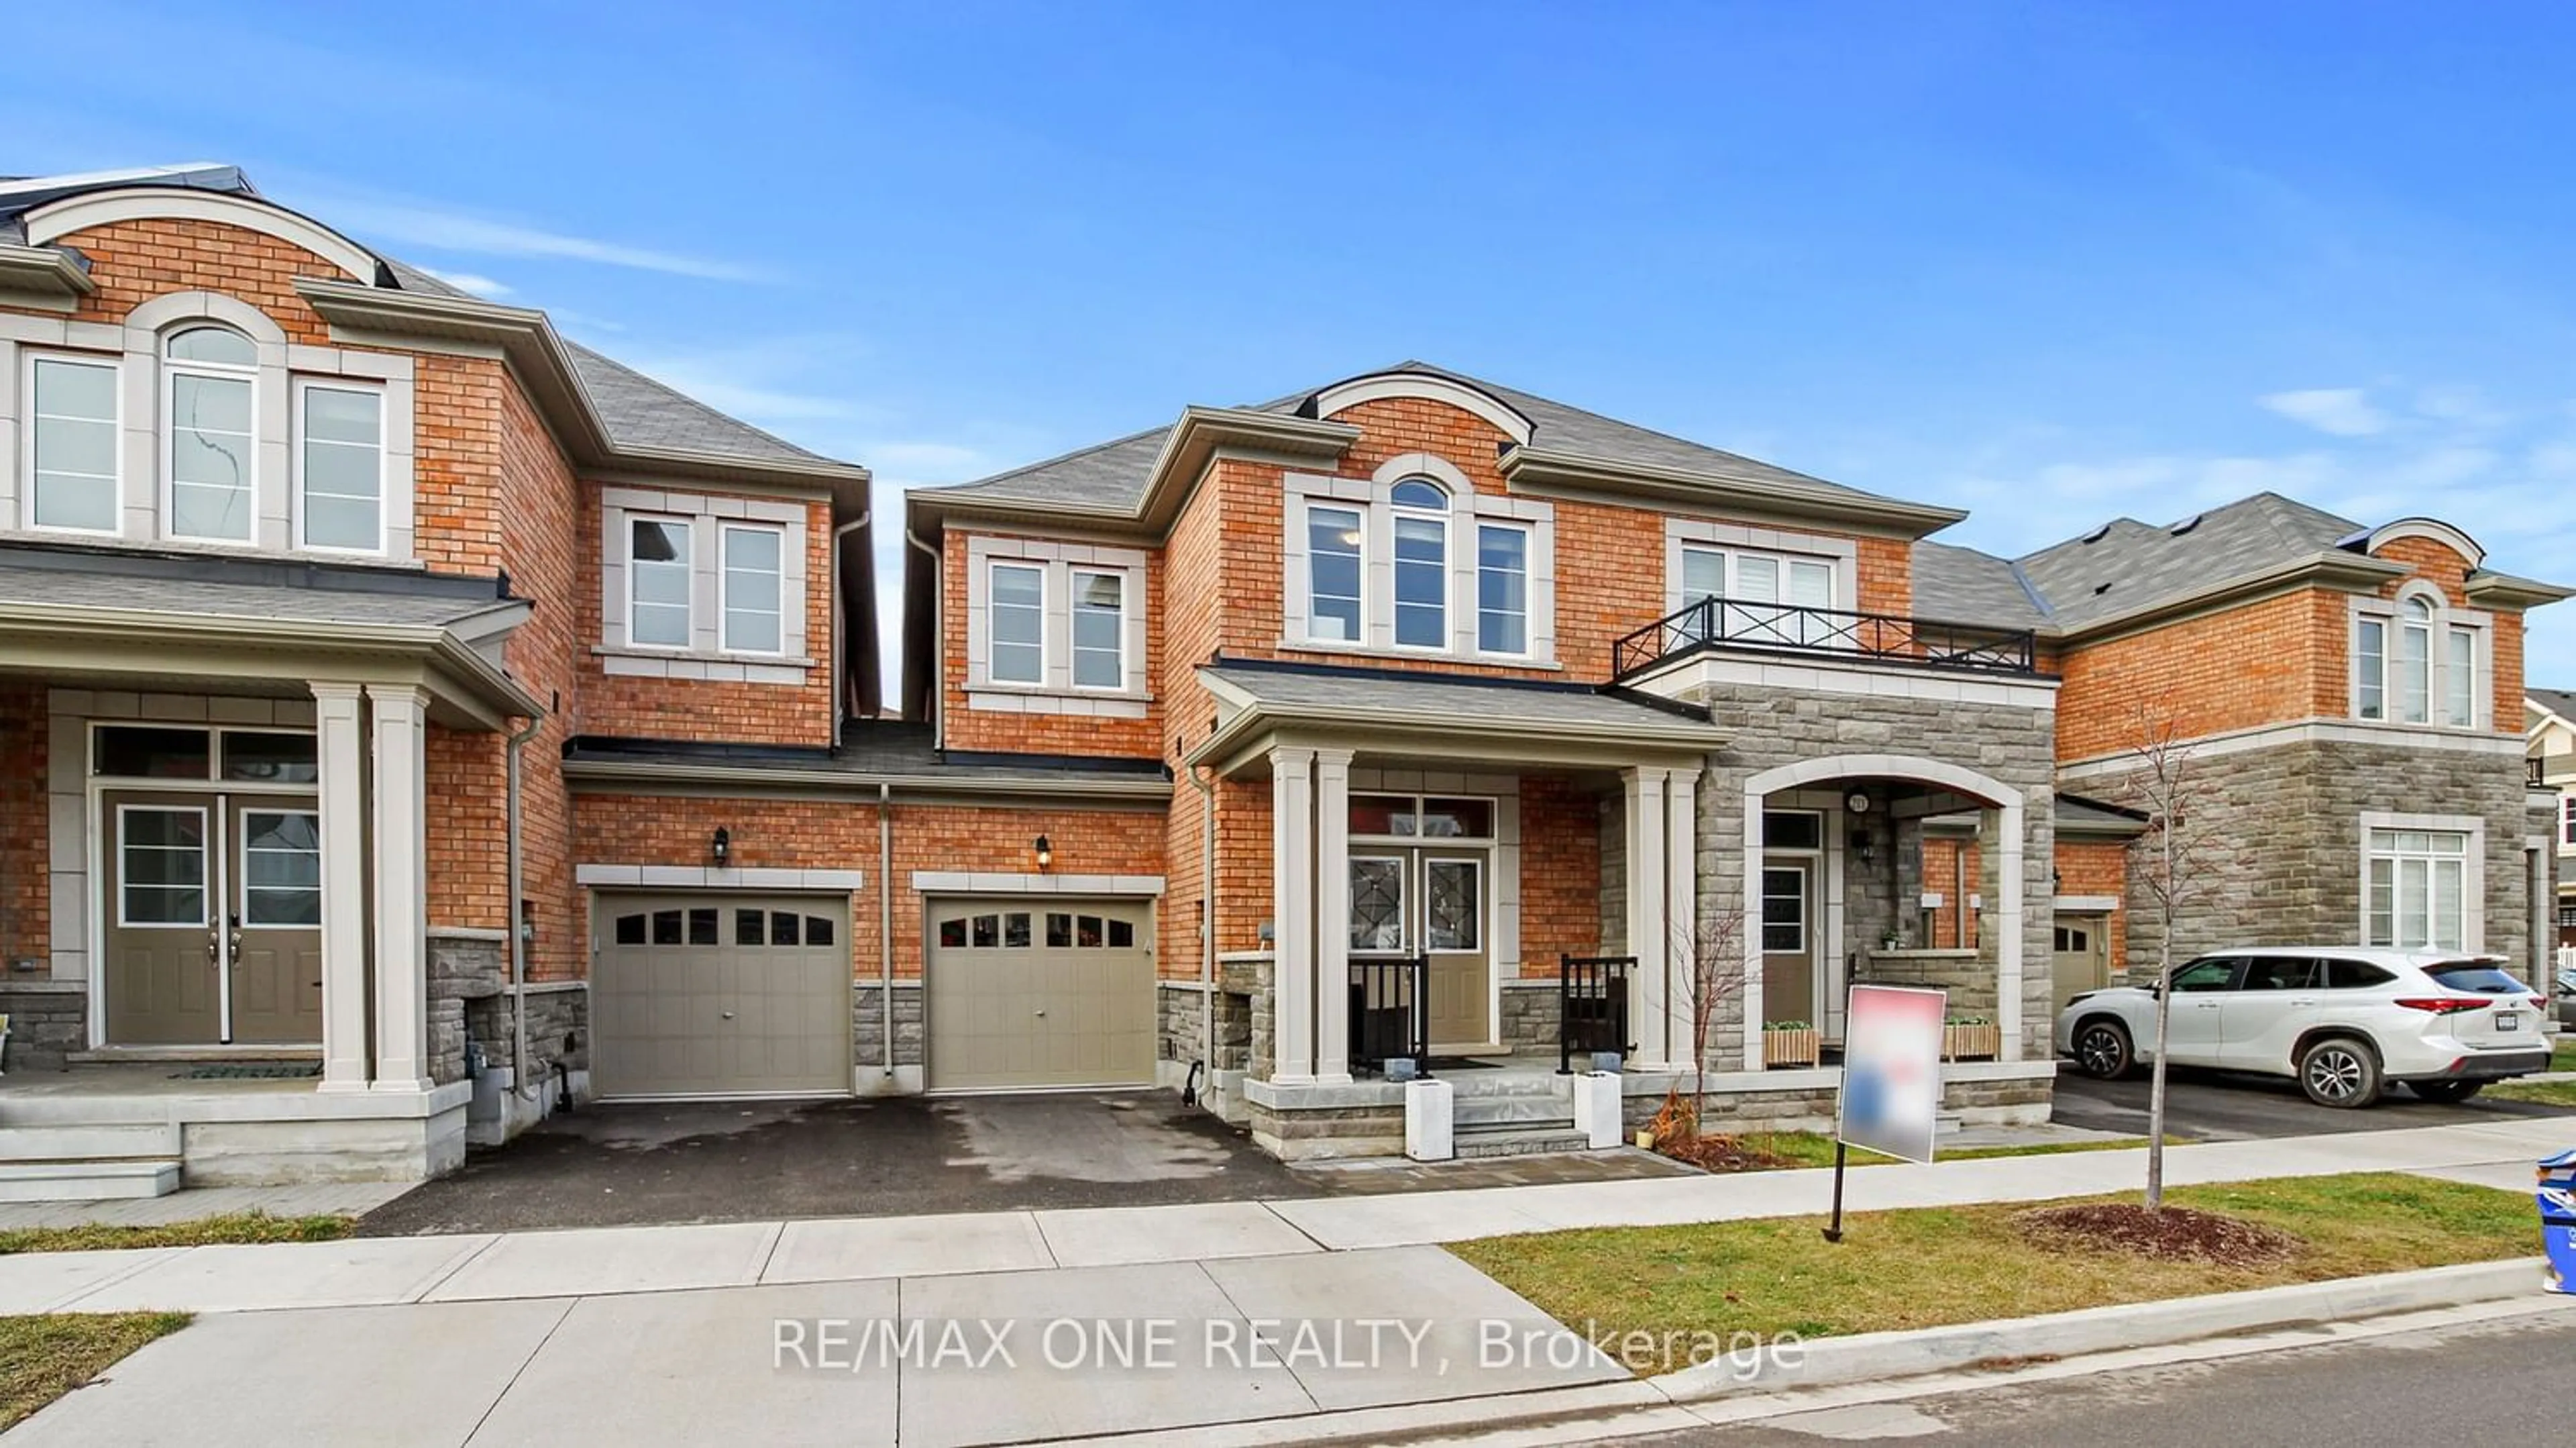 Home with brick exterior material for 213 Wisteria Way, Oakville Ontario L6M 1R1